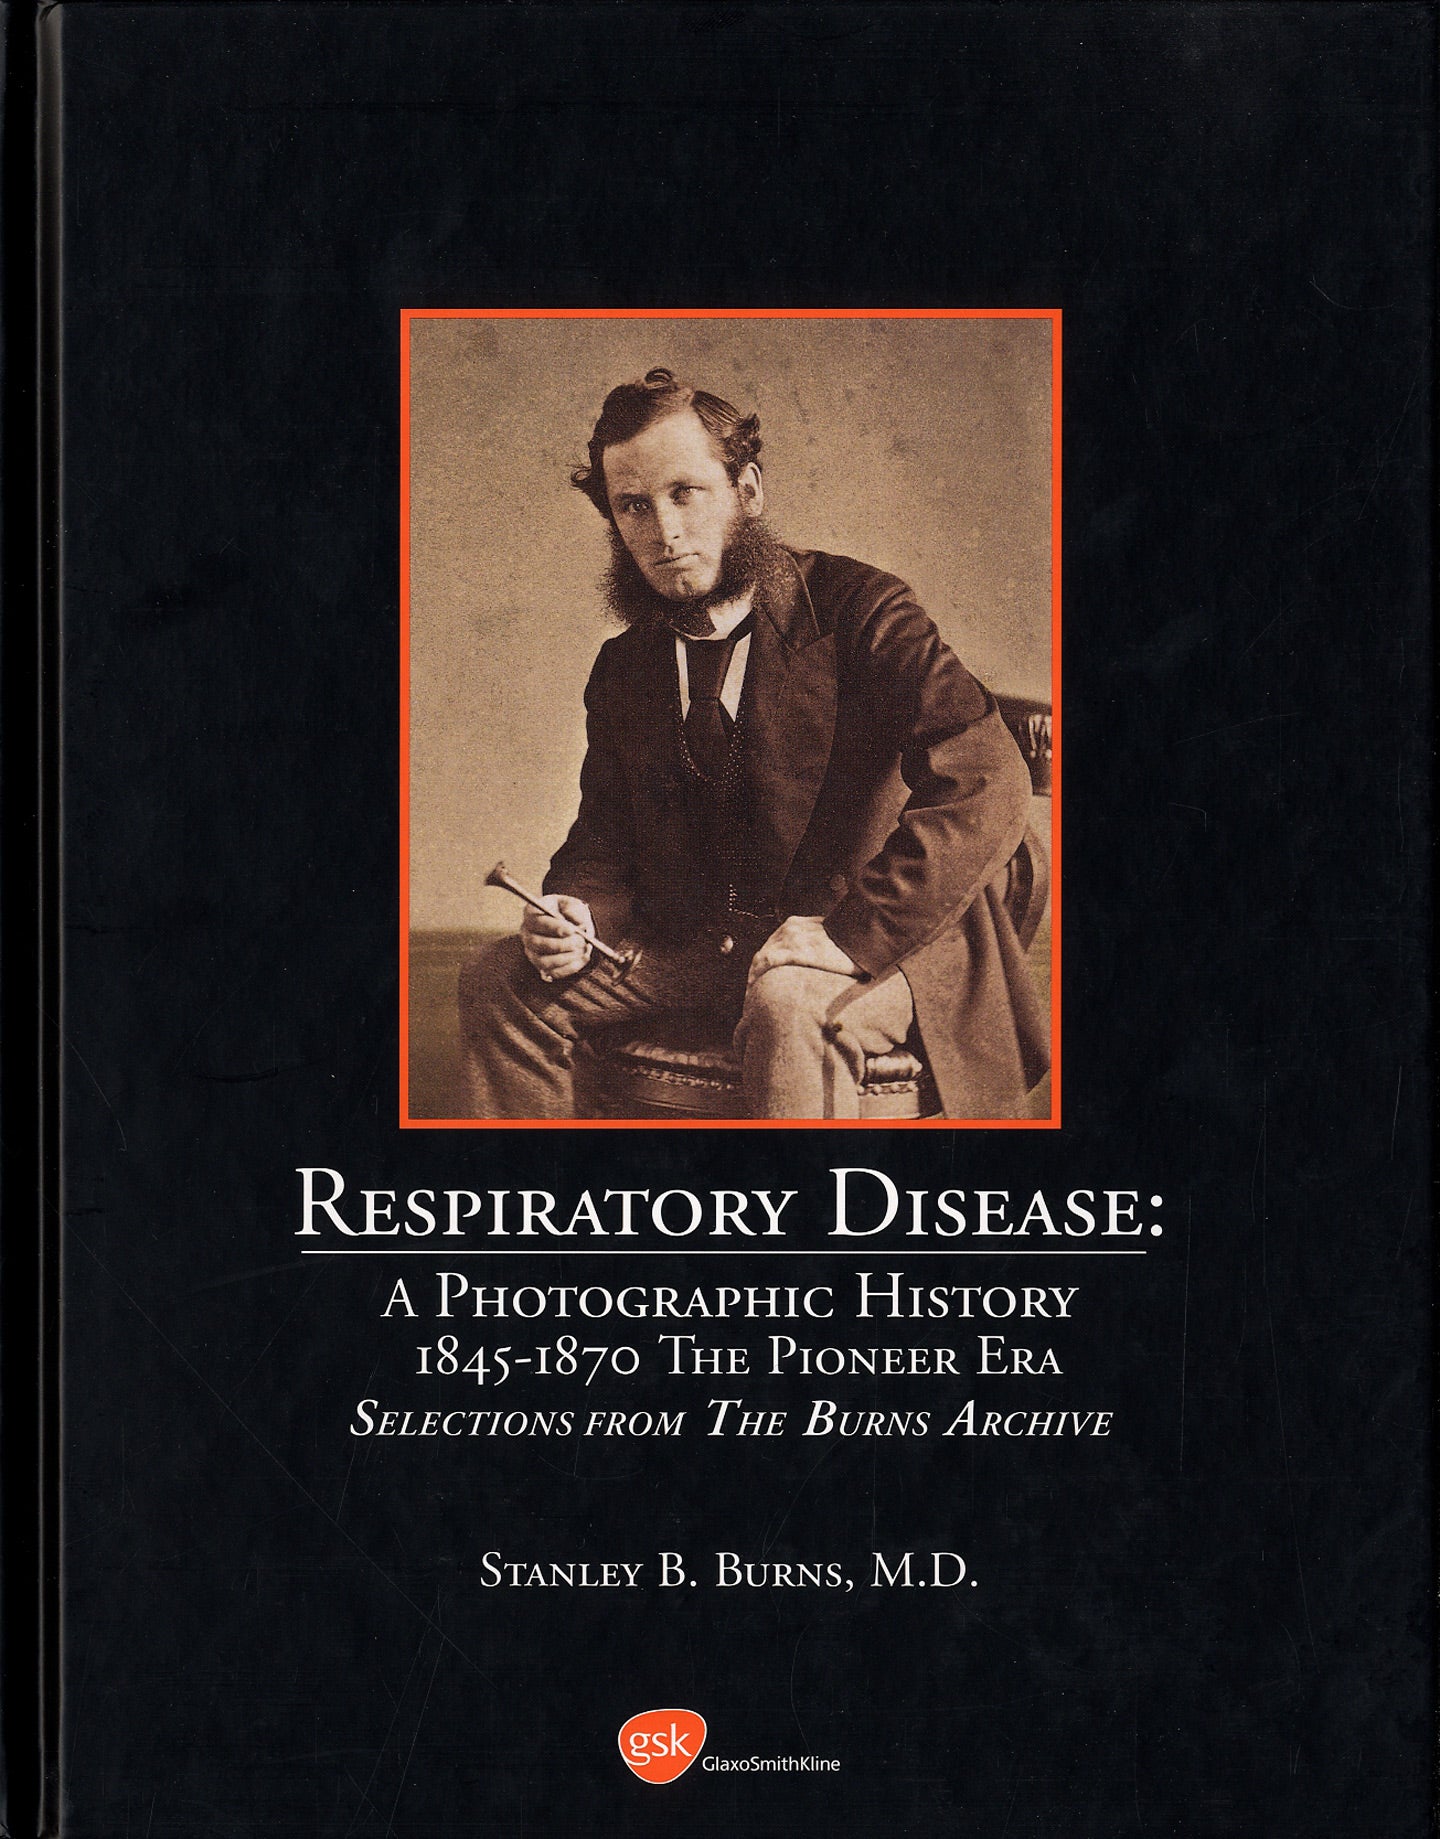 Burns Archive: Respiratory Disease: A Photographic History, 1845-1945, Selections form the Burns Archive, Special Cased Limited Edition Set of Four Books (First Edition) [SIGNED]